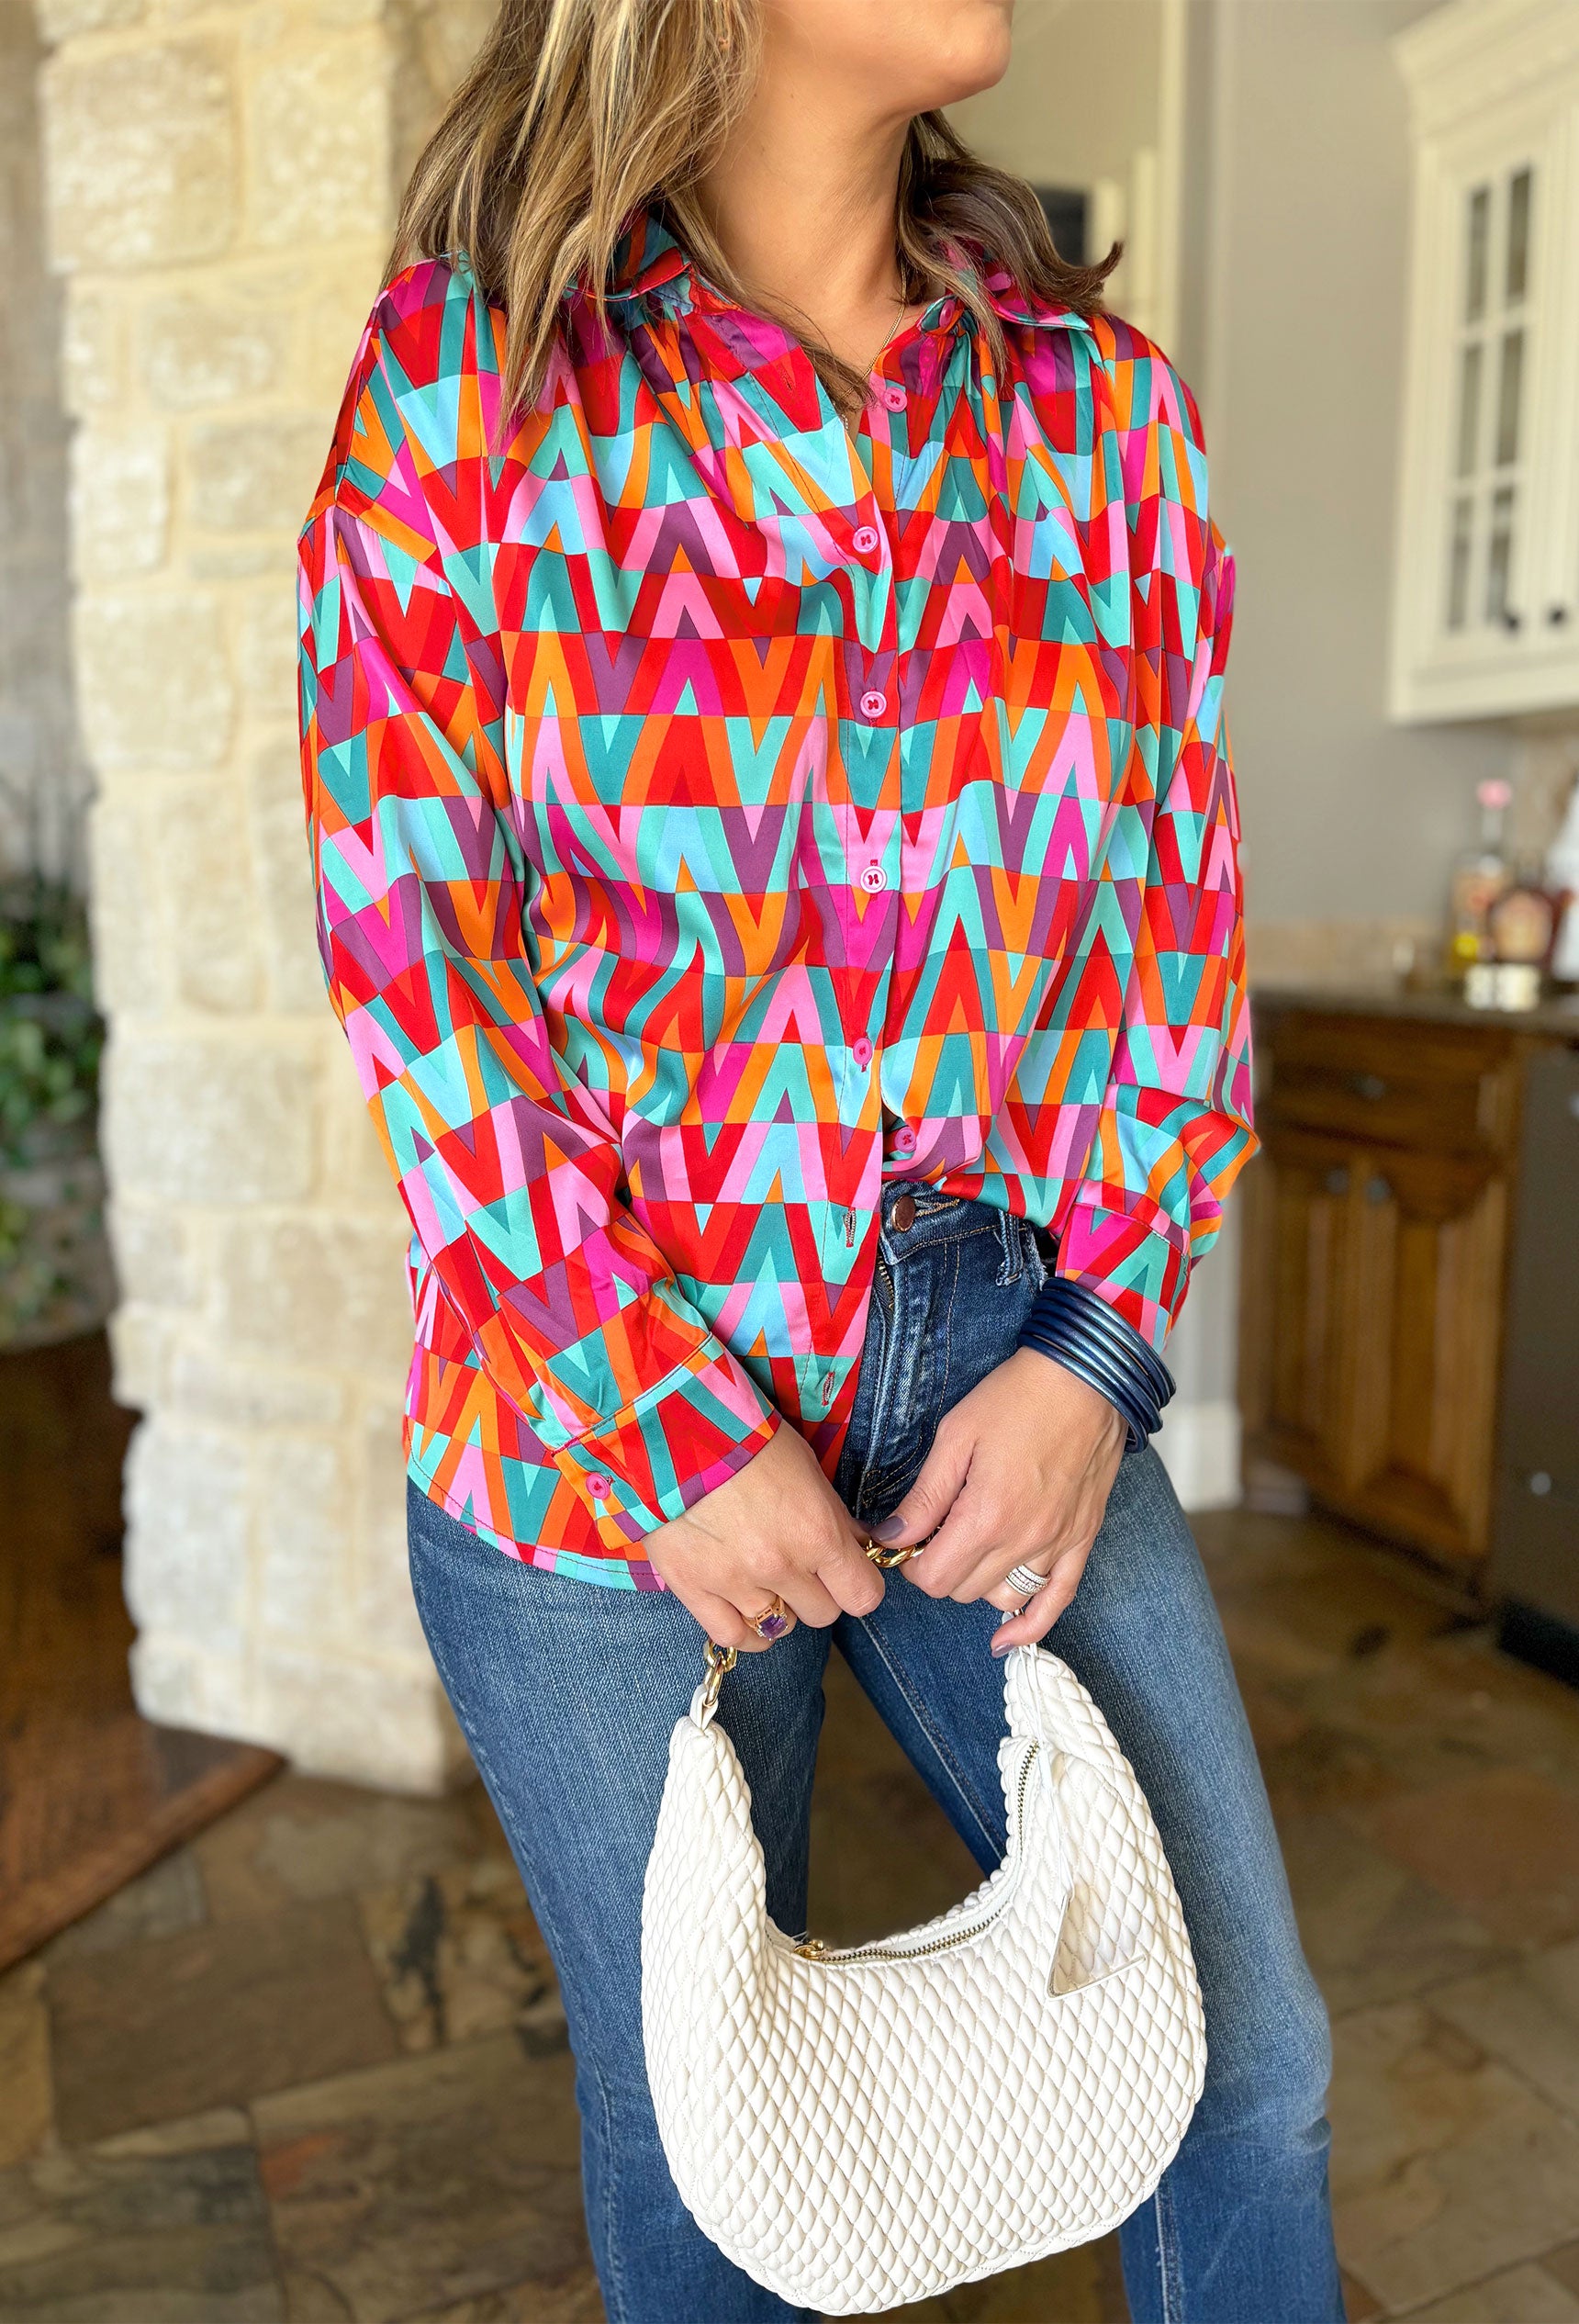 Live In The Moment Top, triangle patterned long sleeve button up blouse in the colors turquoise, red, orange, teal, purple and pink 